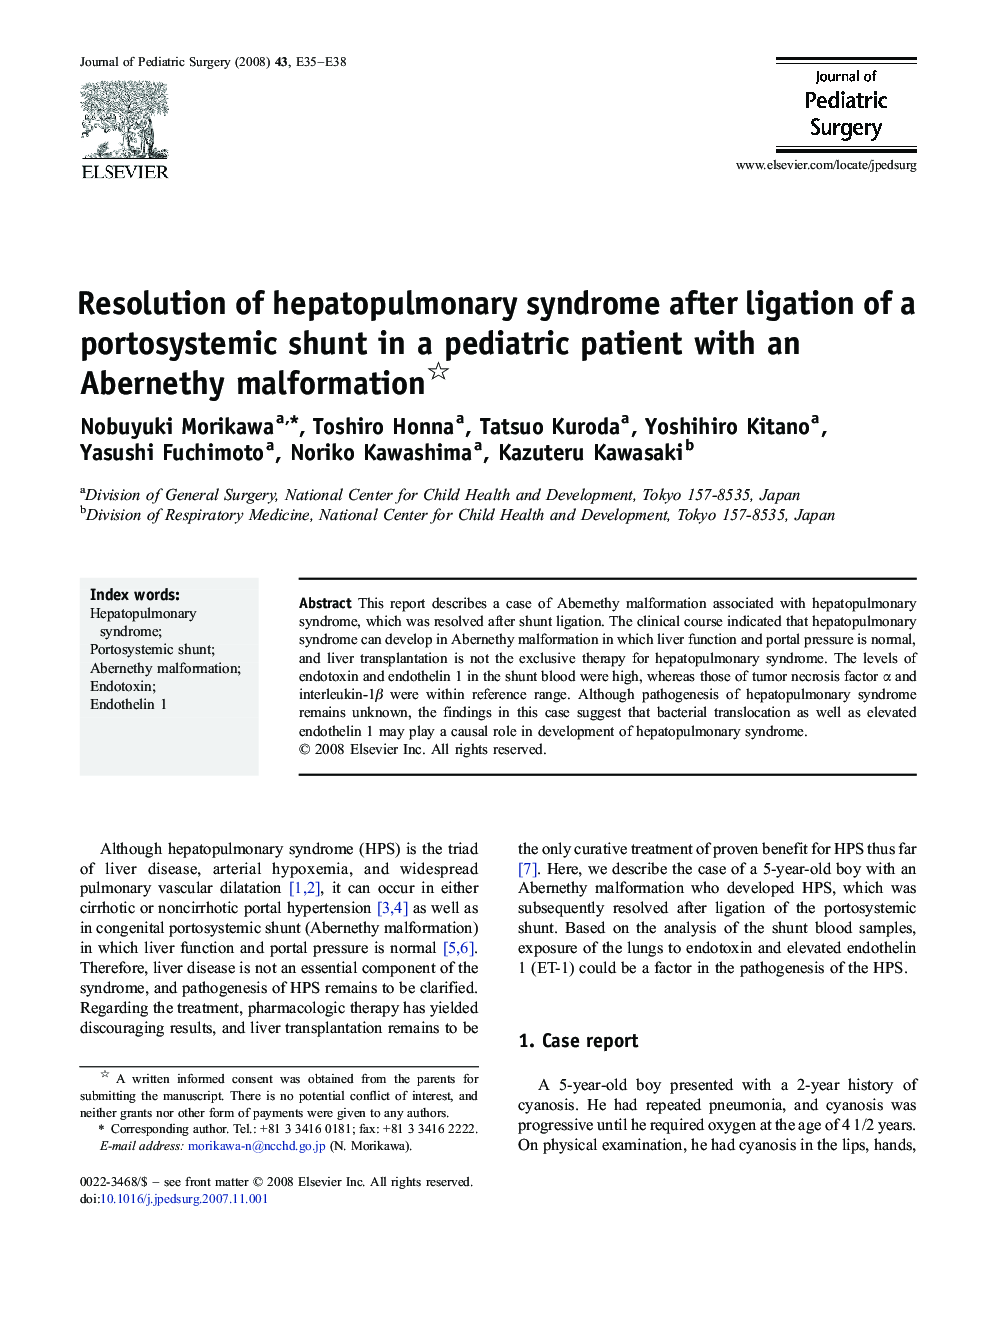 Resolution of hepatopulmonary syndrome after ligation of a portosystemic shunt in a pediatric patient with an Abernethy malformation 